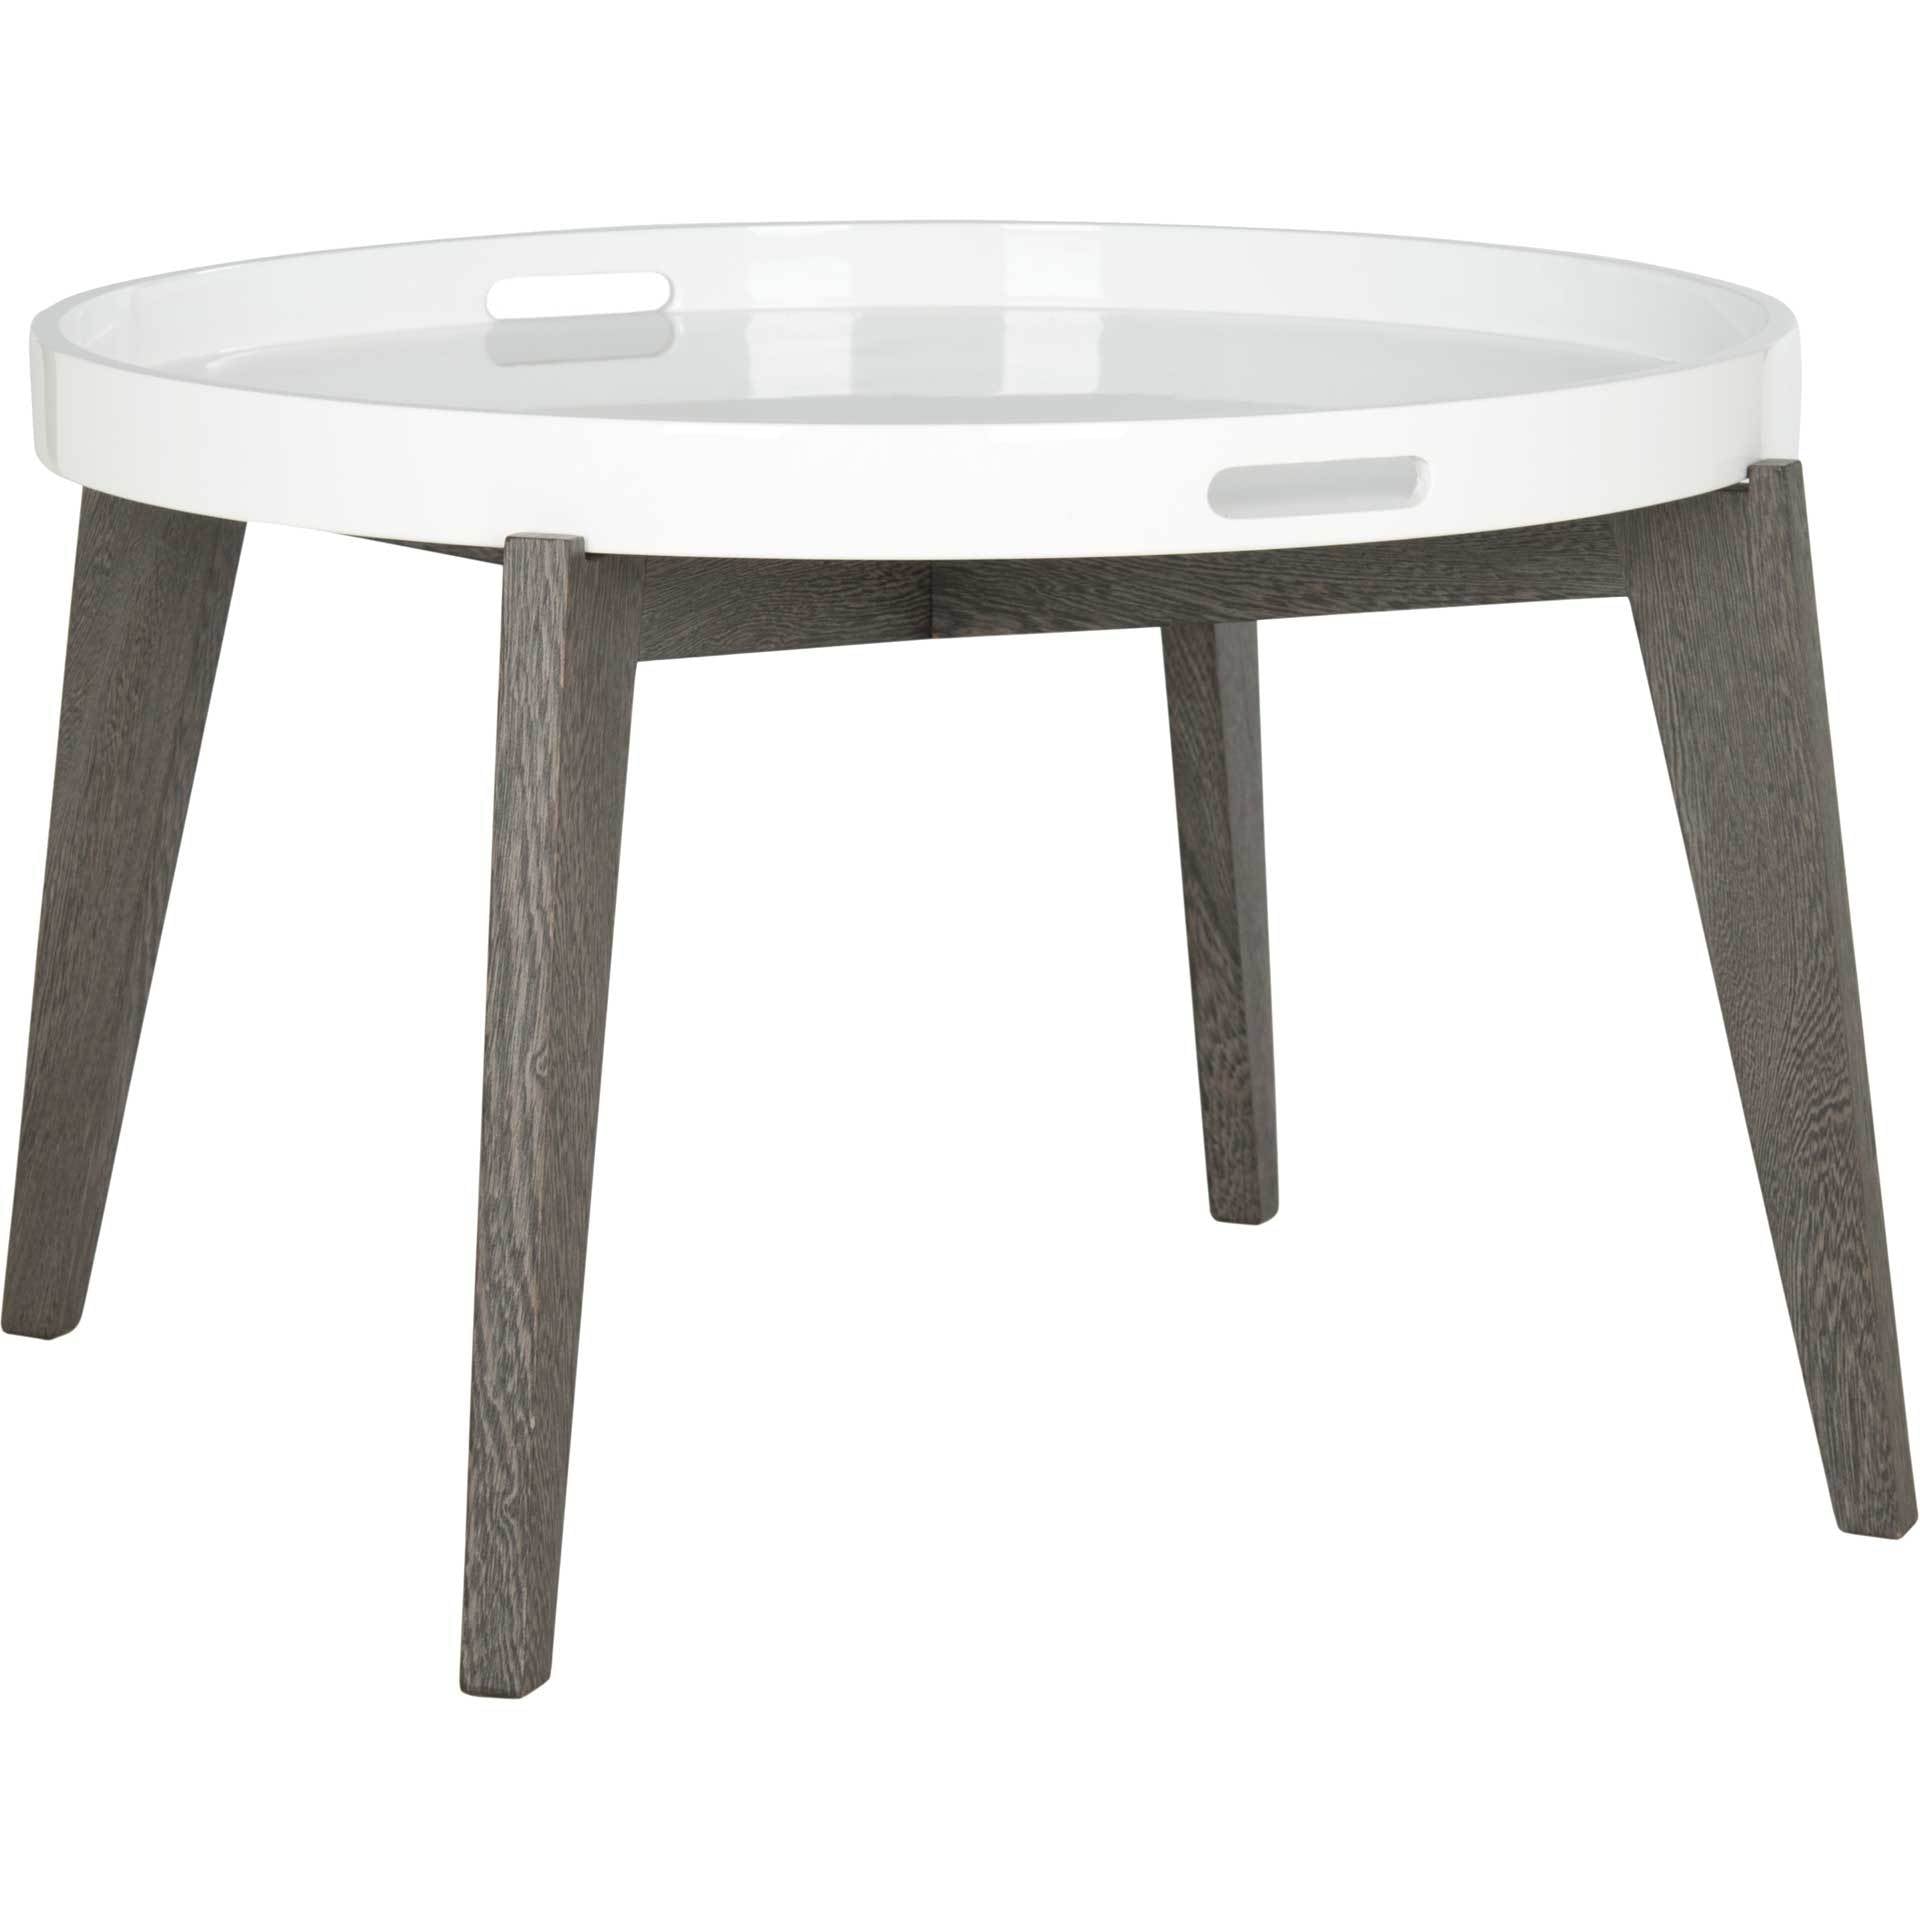 Ece Tray Top Lacquer End Table White/Dark Brown